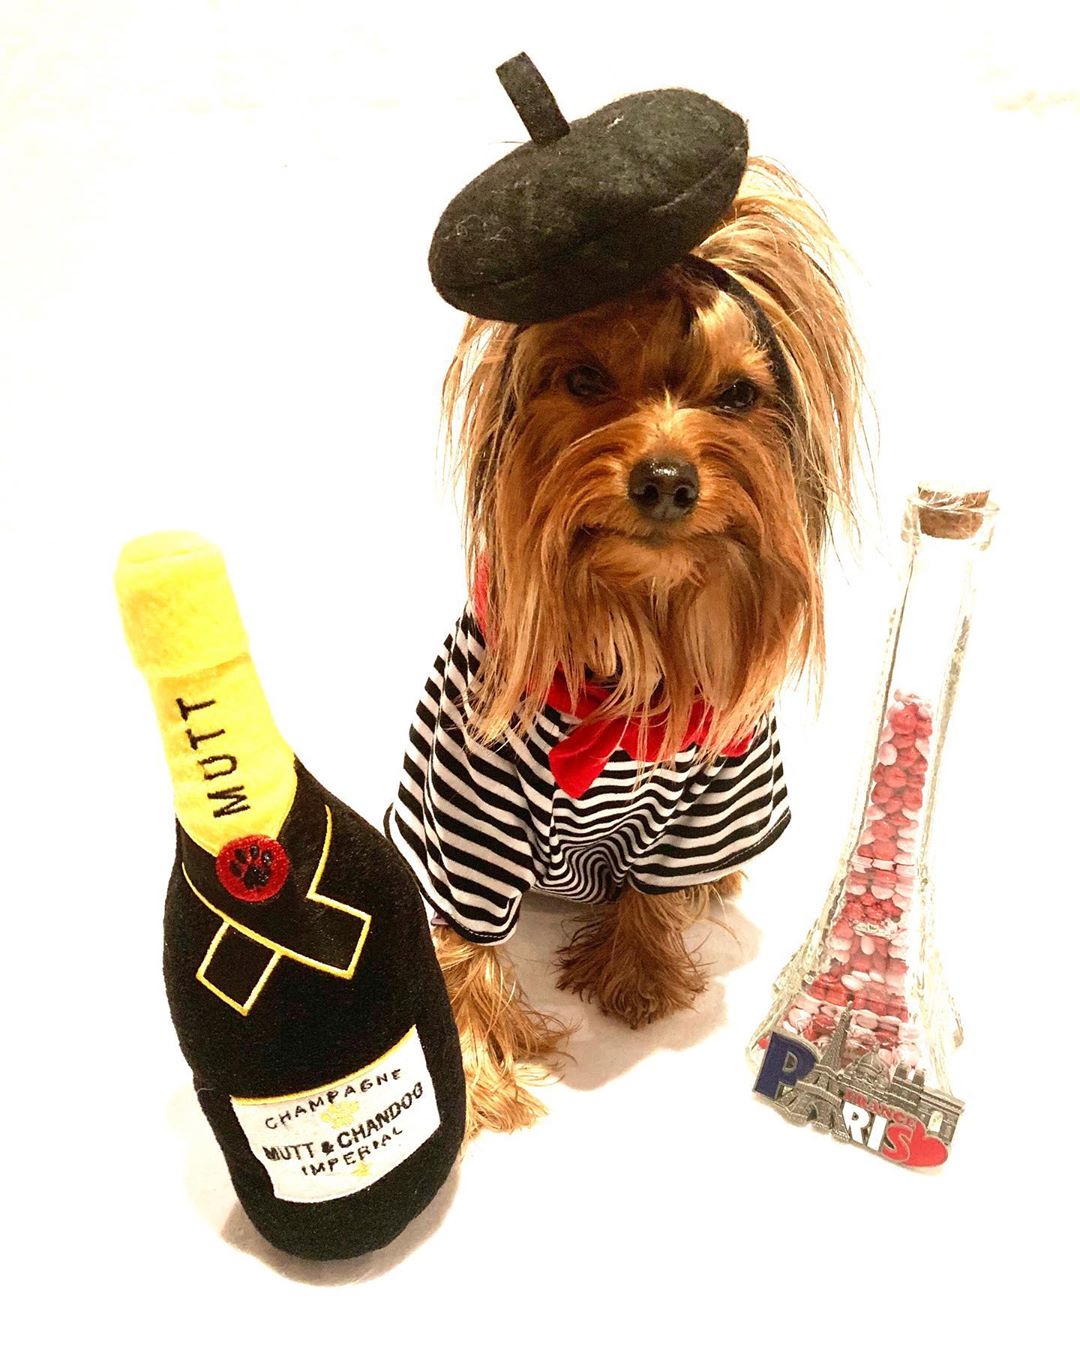 A Yorkshire Terrier wearing french outfit behind a wine stuffed toy and glass bottle and paris keychain